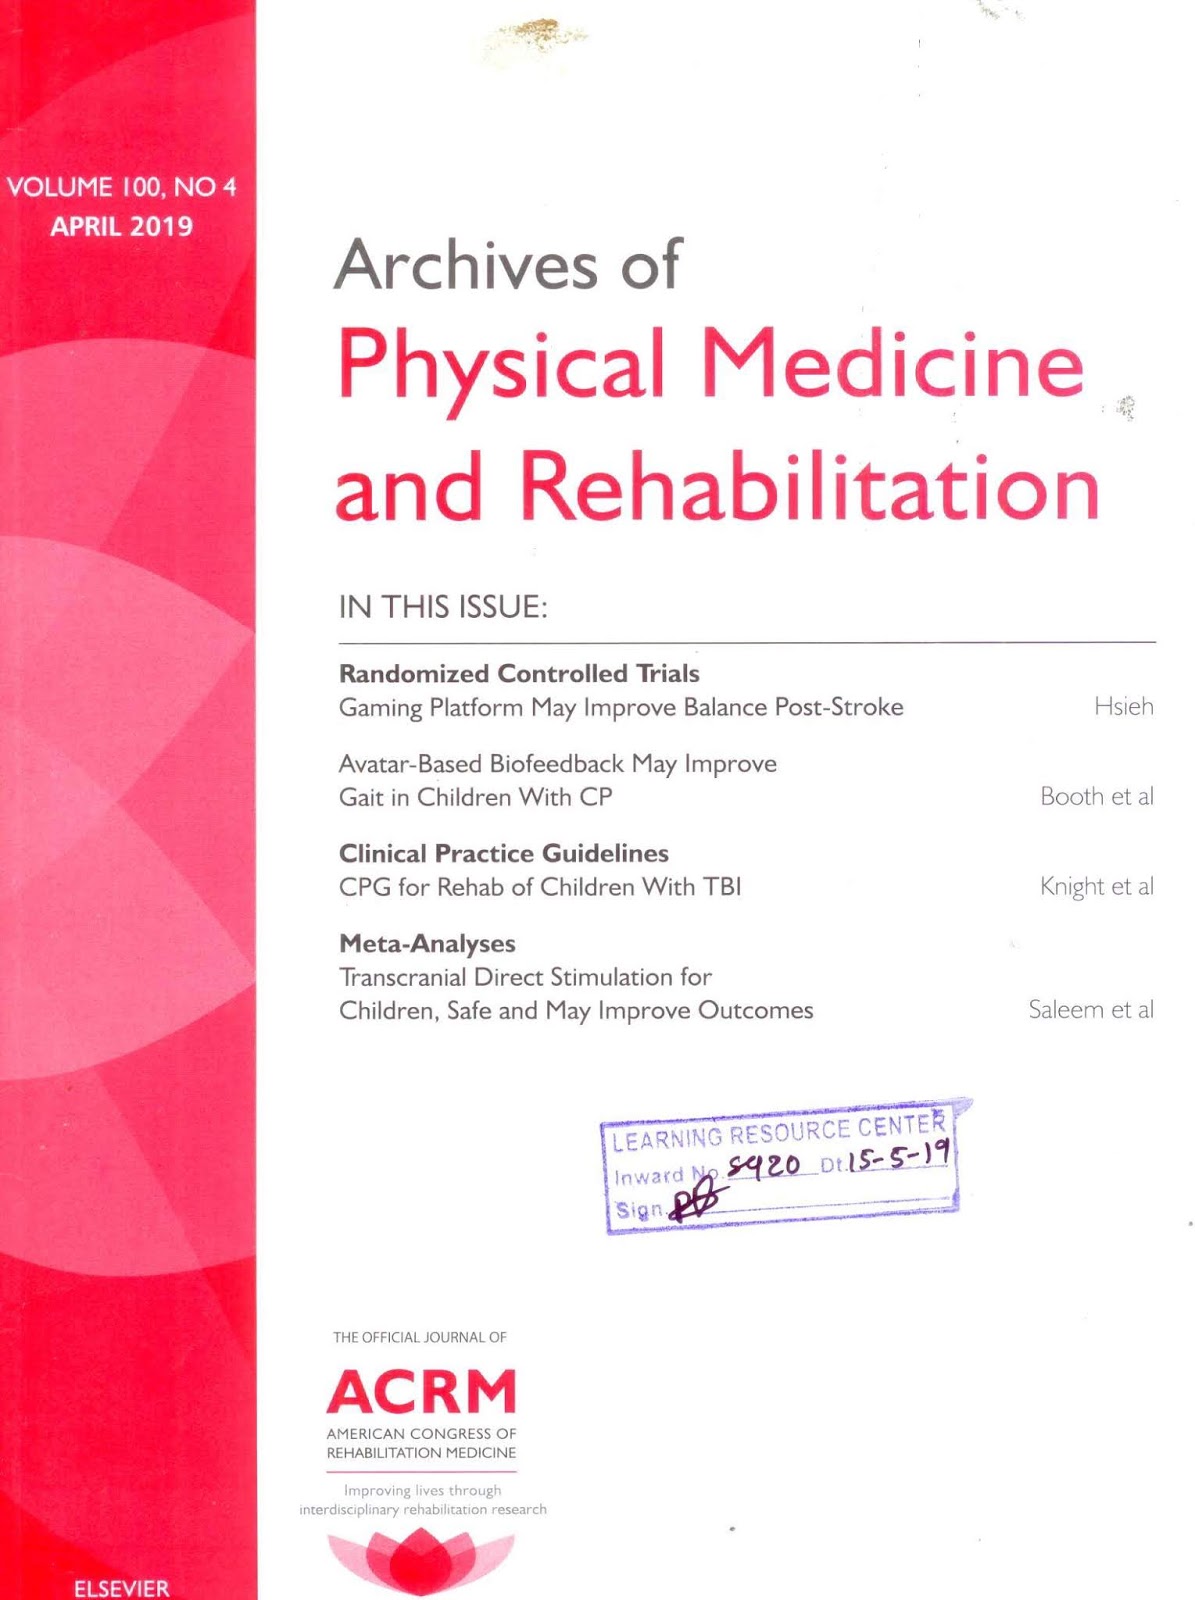 https://www.sciencedirect.com/journal/archives-of-physical-medicine-and-rehabilitation/vol/100/issue/4